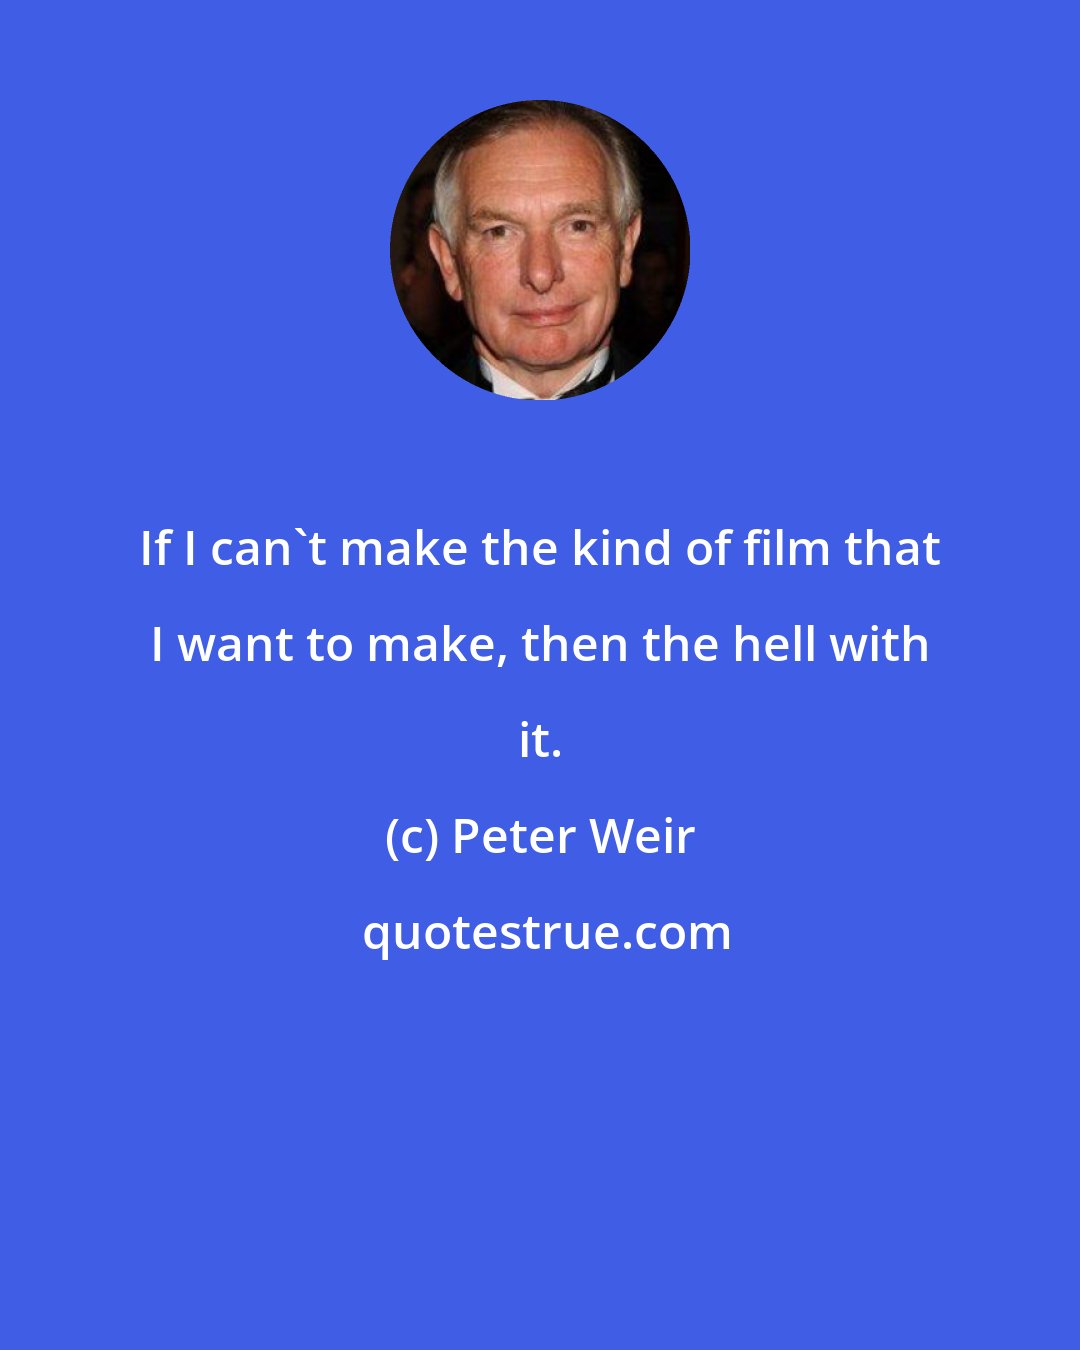 Peter Weir: If I can't make the kind of film that I want to make, then the hell with it.